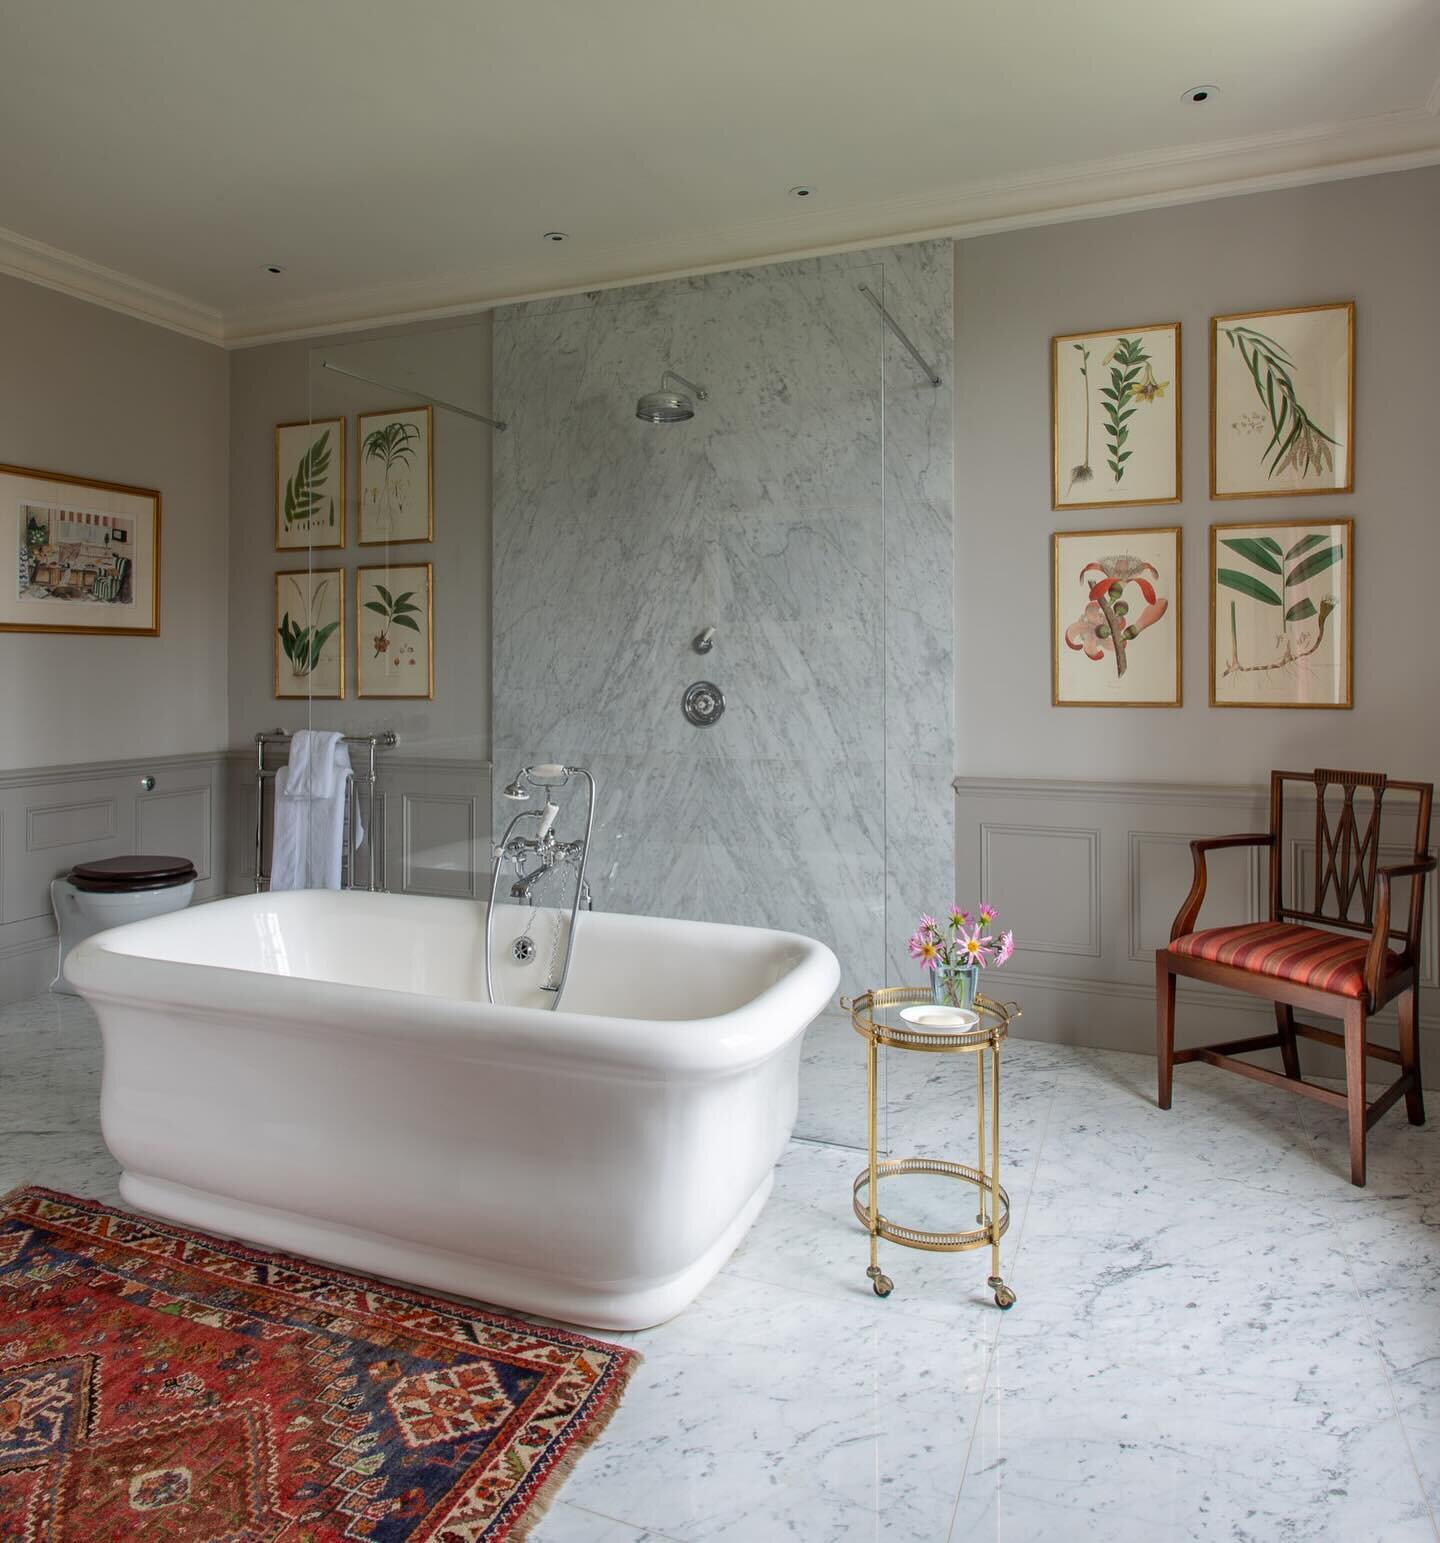 Bathing beauty.  Decorating a bathroom with interesting art and decorative details such as a rug can make it cosy rather than clinical. 📸 @marknicholson.photographer #bathroomdesign #marble #bathroomdecor #howwedwell #interiordesign #naturalstone #e